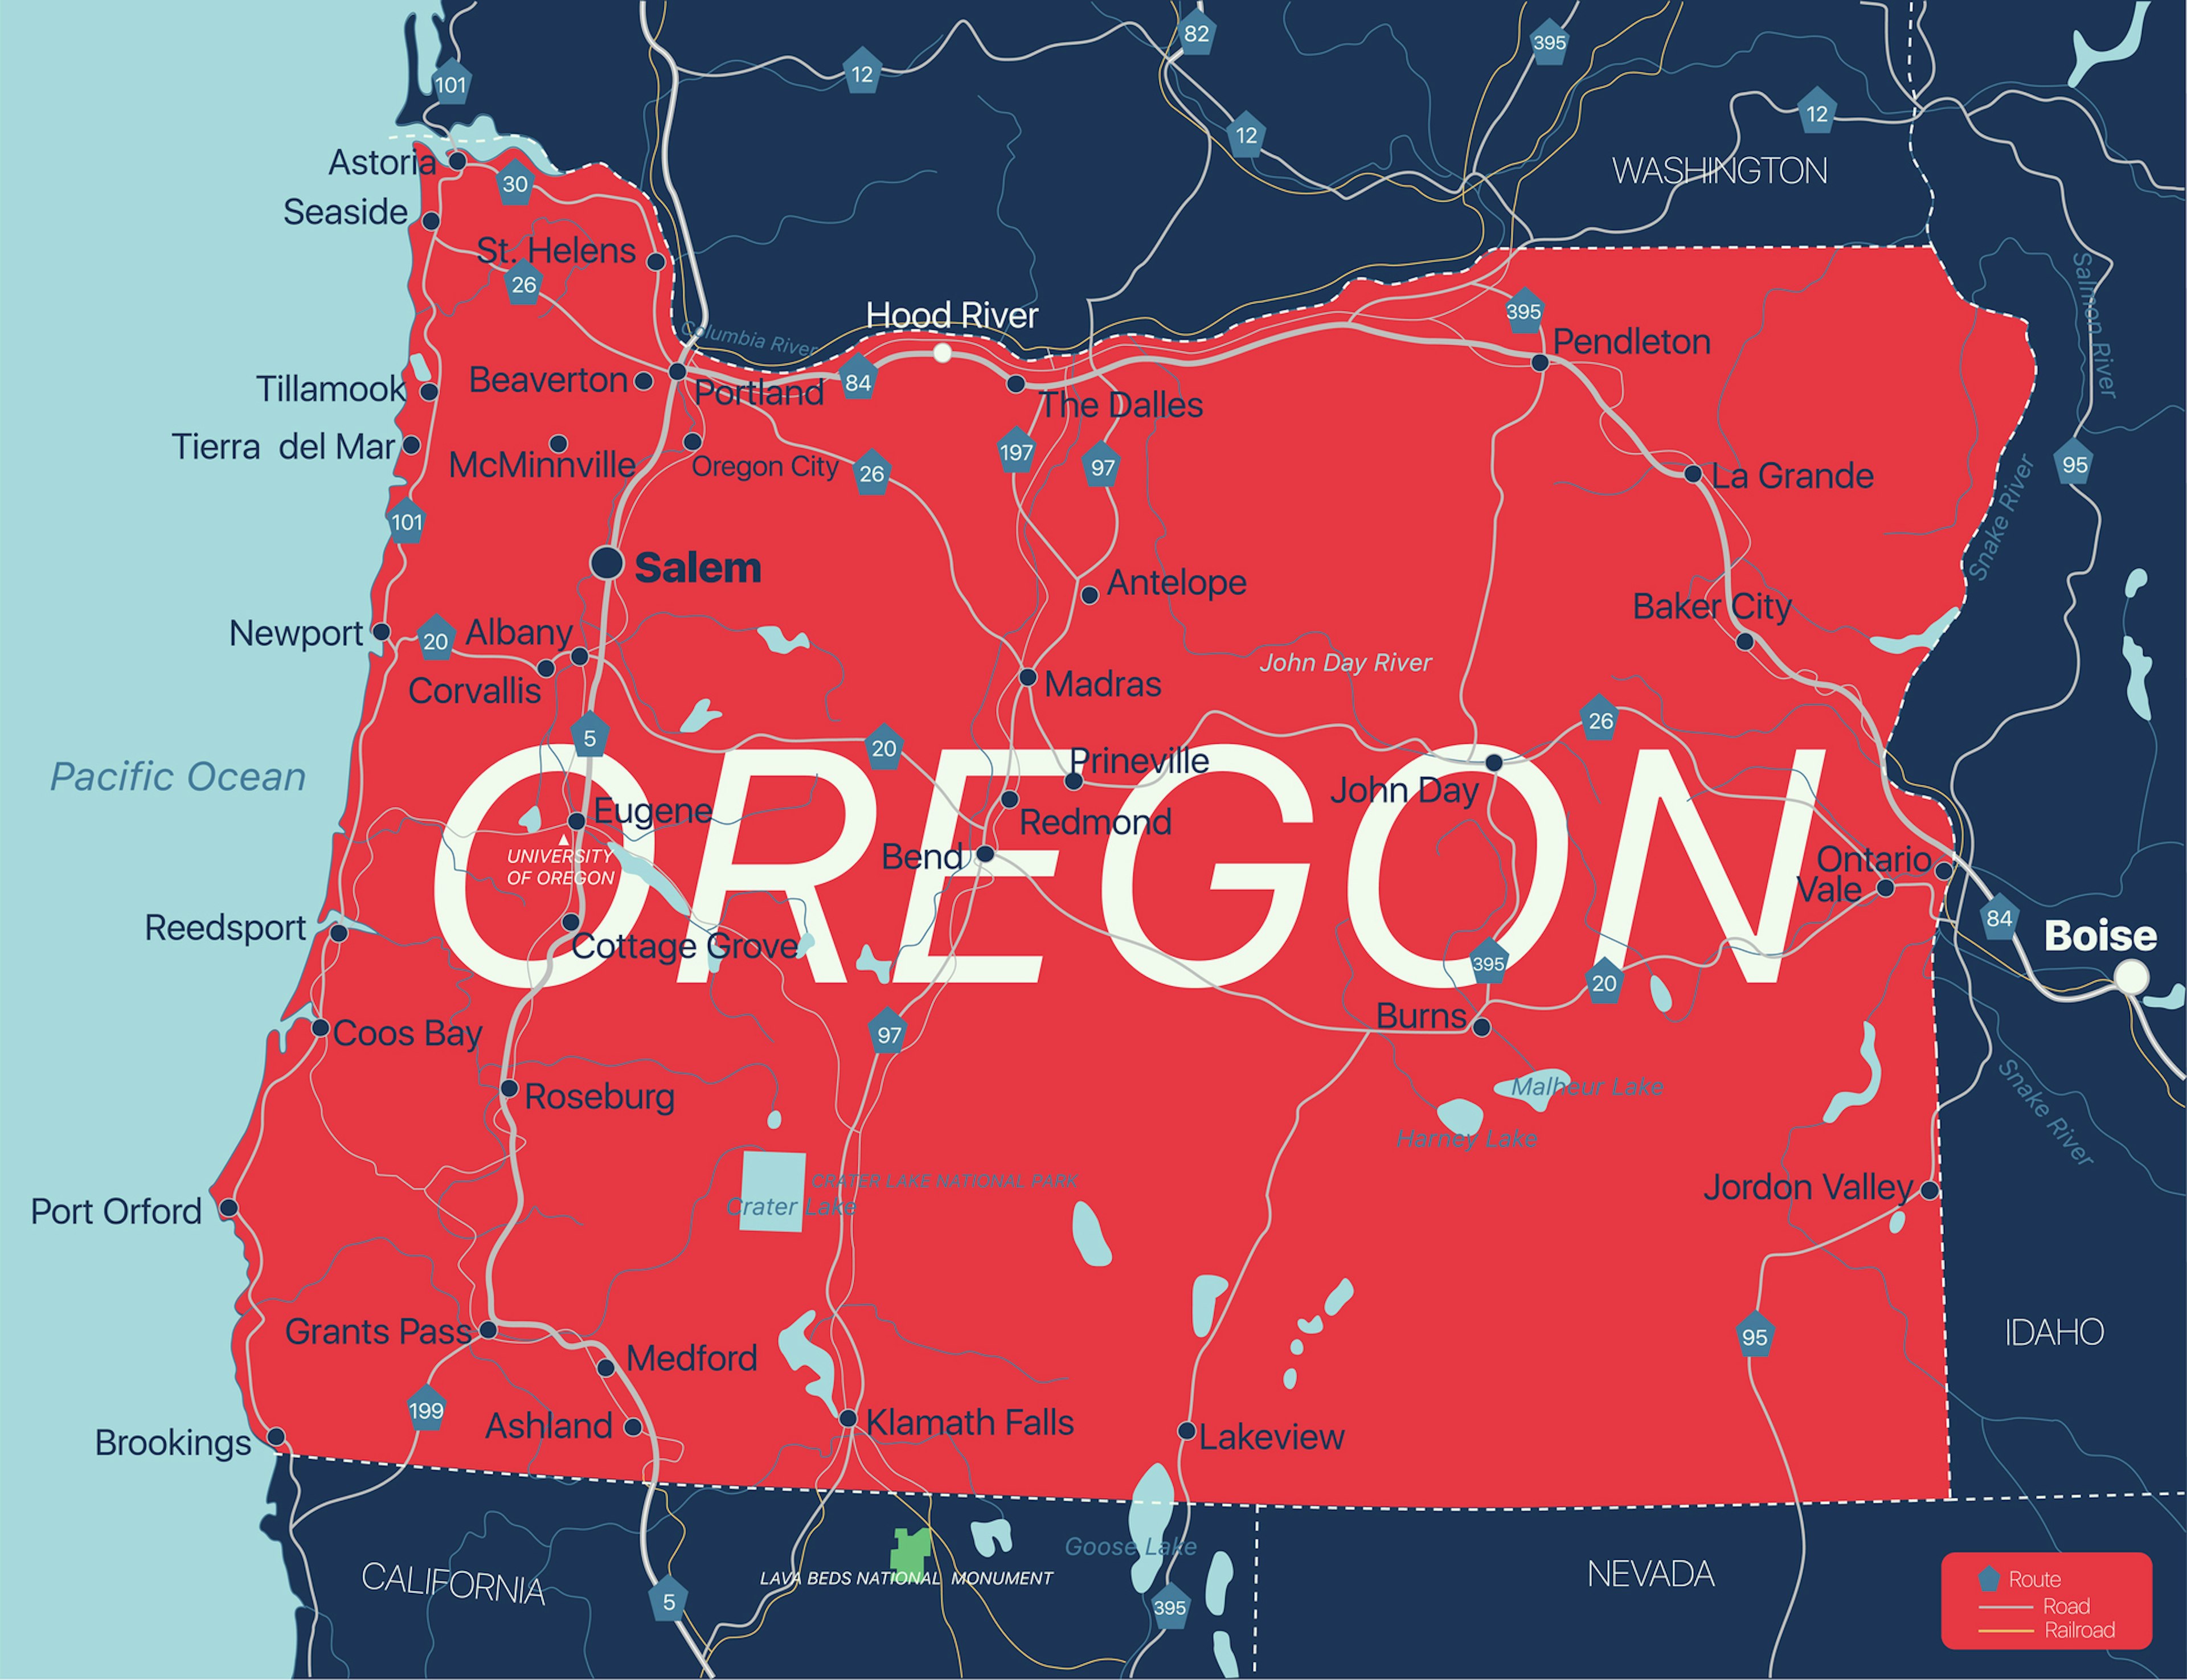 Oregon state detailed editable map with cities and towns, geographic sites, roads, railways, interstates and U.S. highways. Vector EPS-10 file, trending color scheme. rusak. Getty Images.